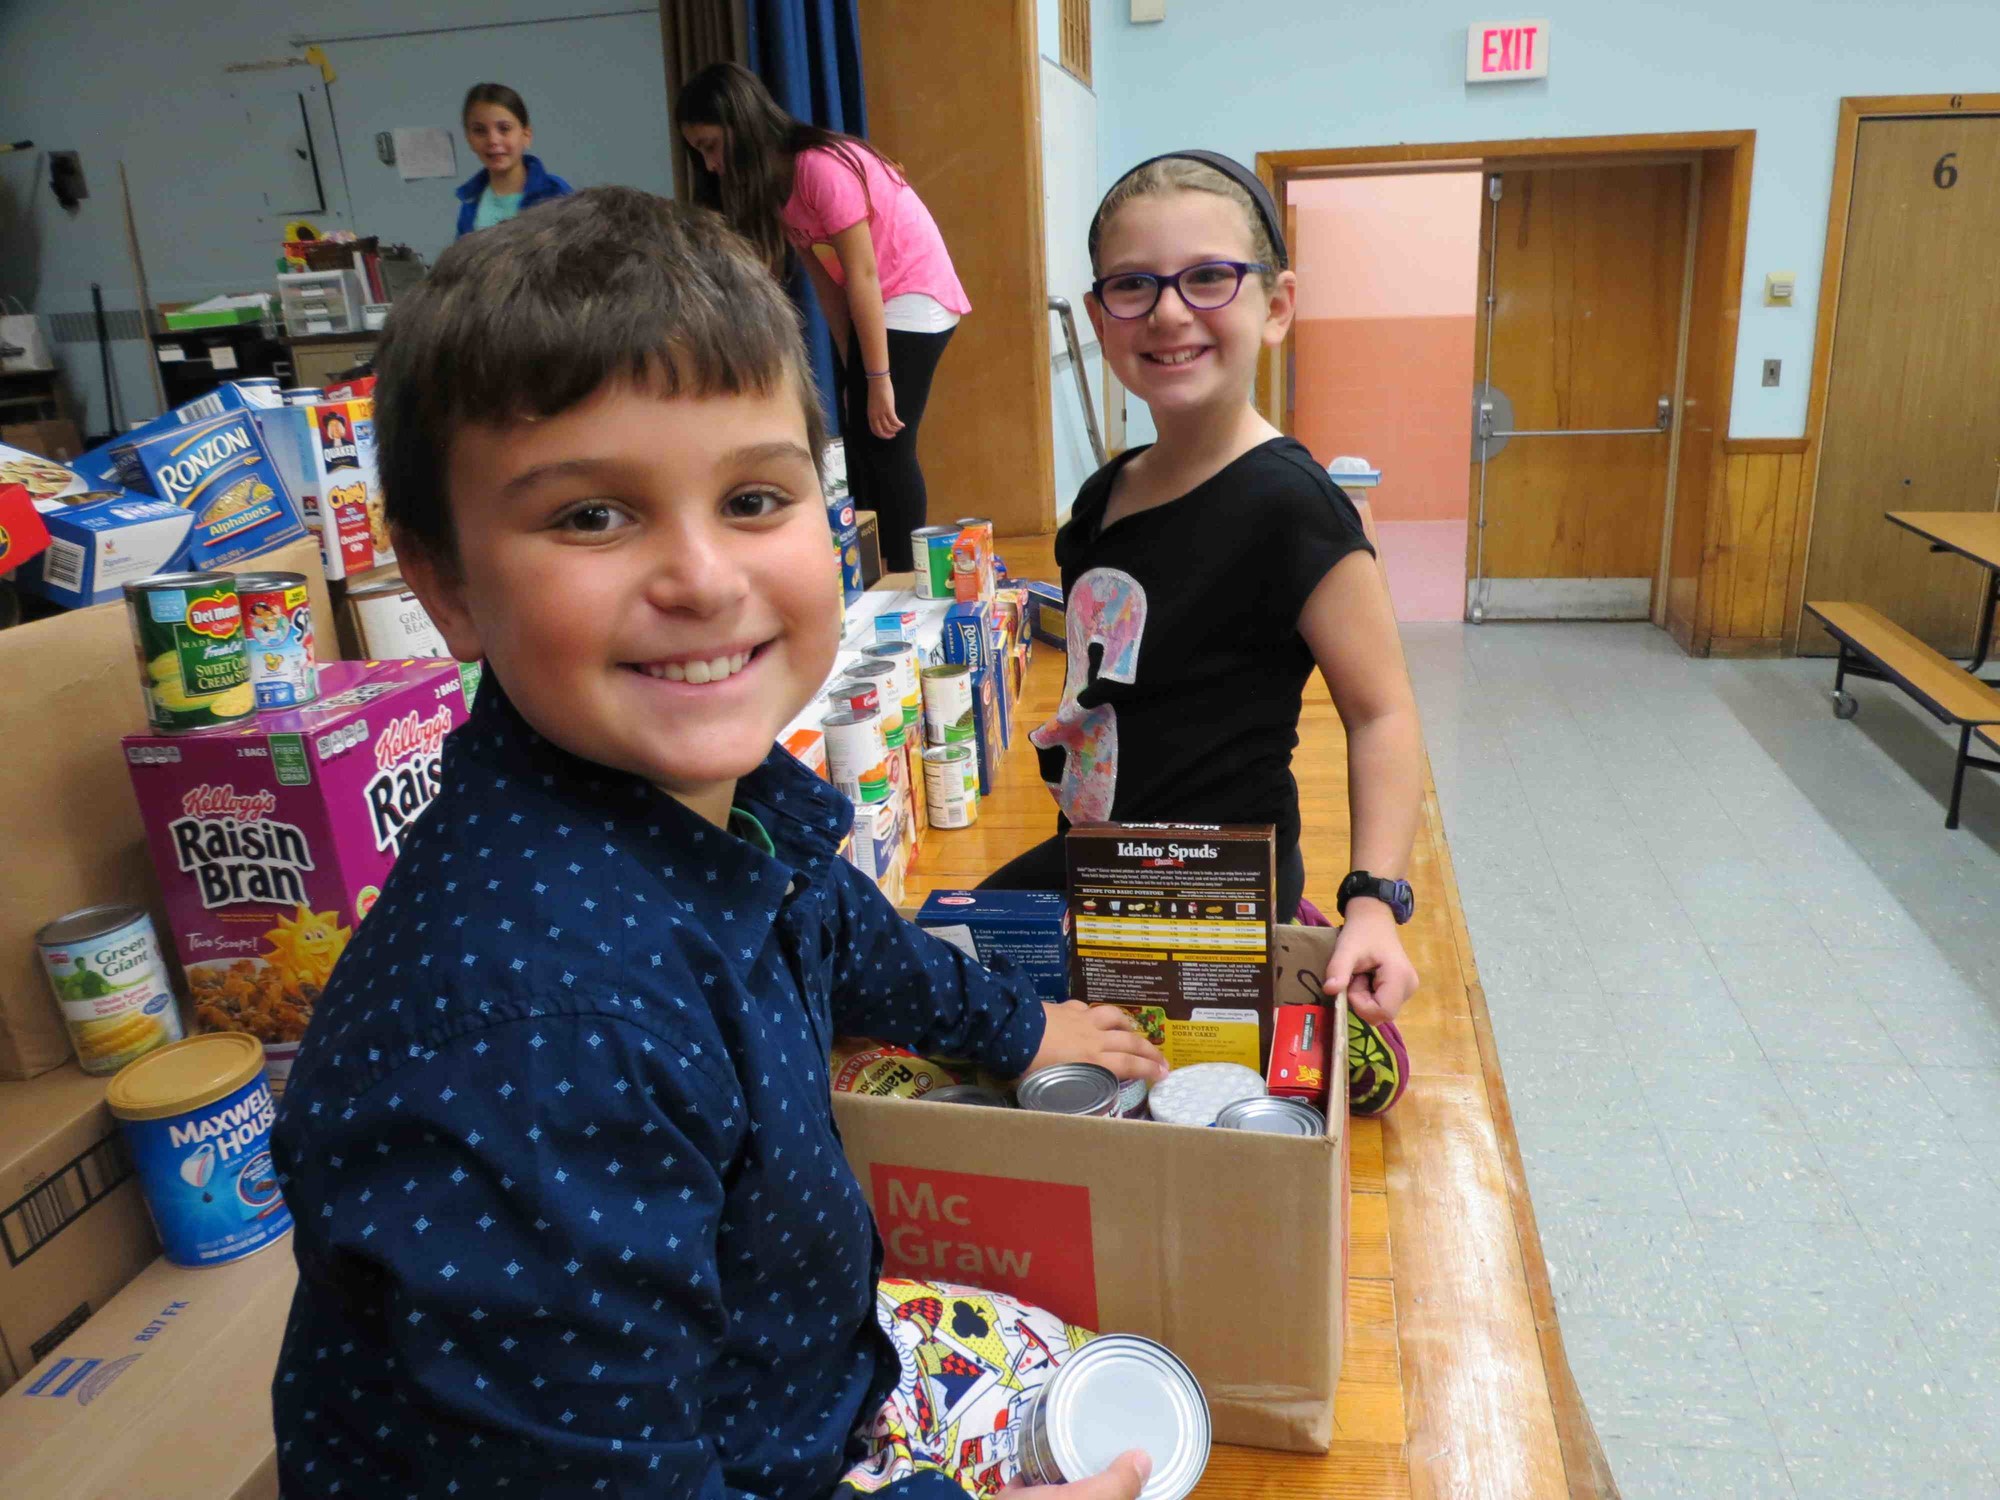 Students packaged the food for needy people to enjoy on Thanksgiving.